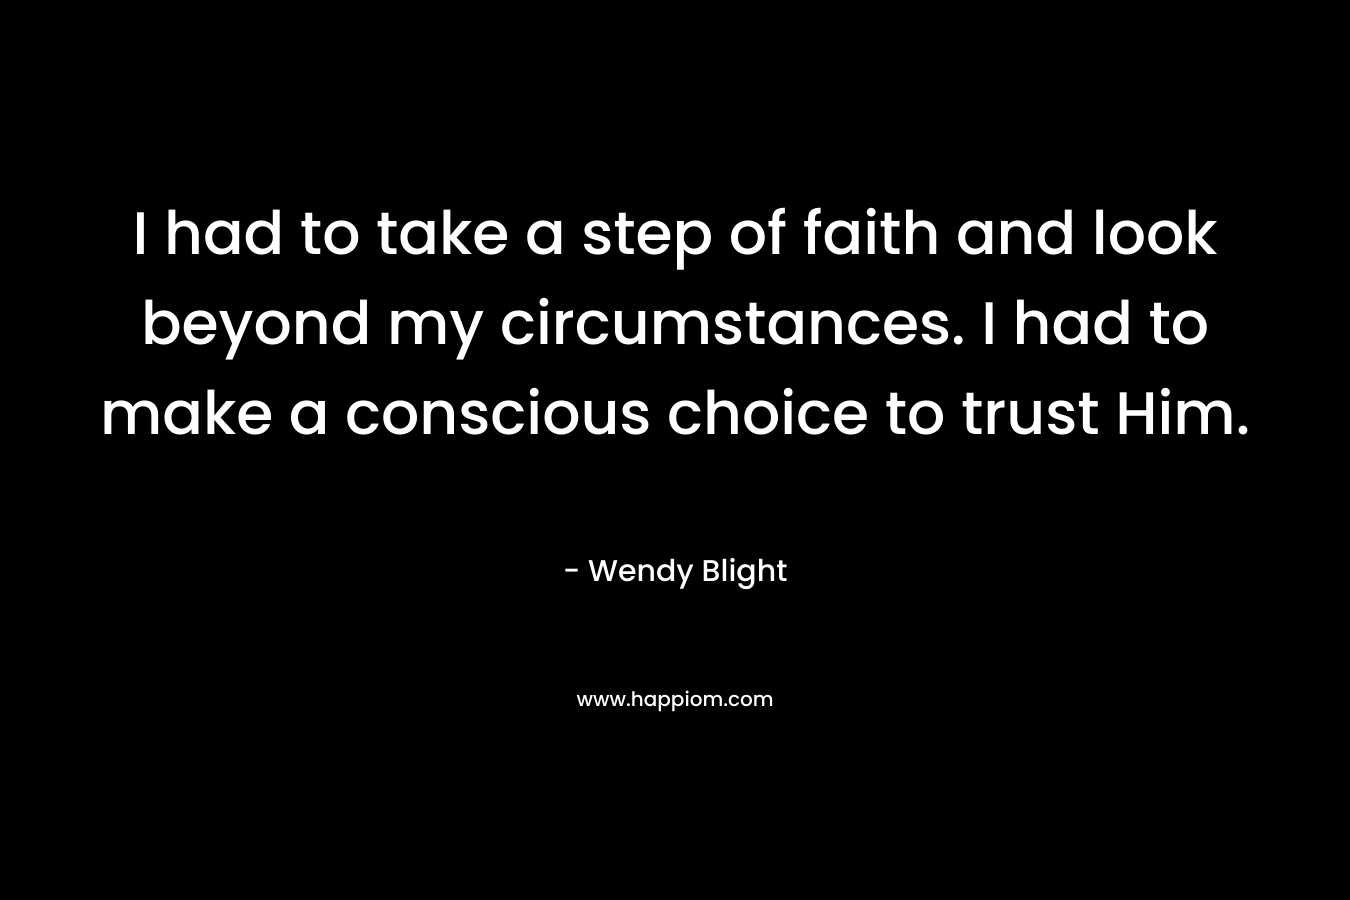 I had to take a step of faith and look beyond my circumstances. I had to make a conscious choice to trust Him.